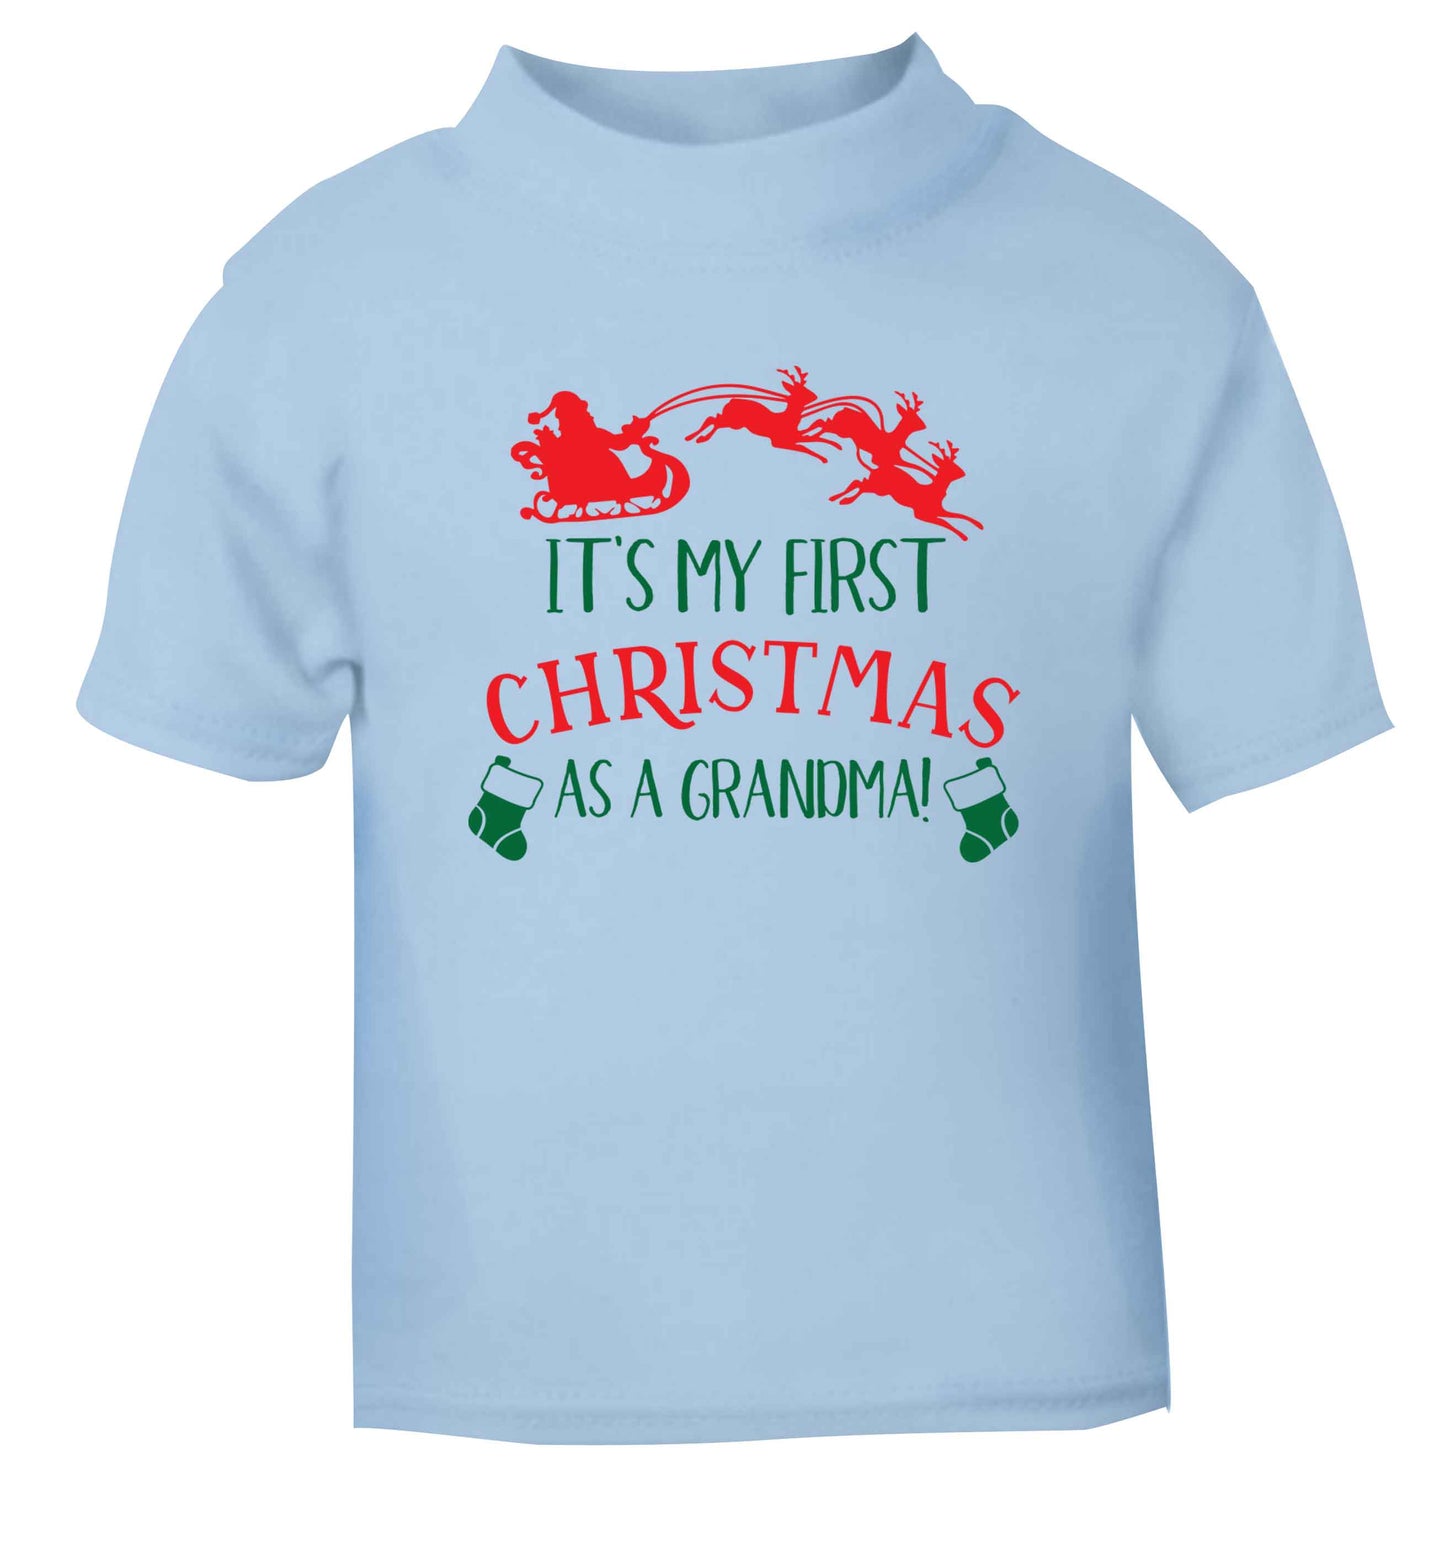 It's my first Christmas as a grandma! light blue Baby Toddler Tshirt 2 Years